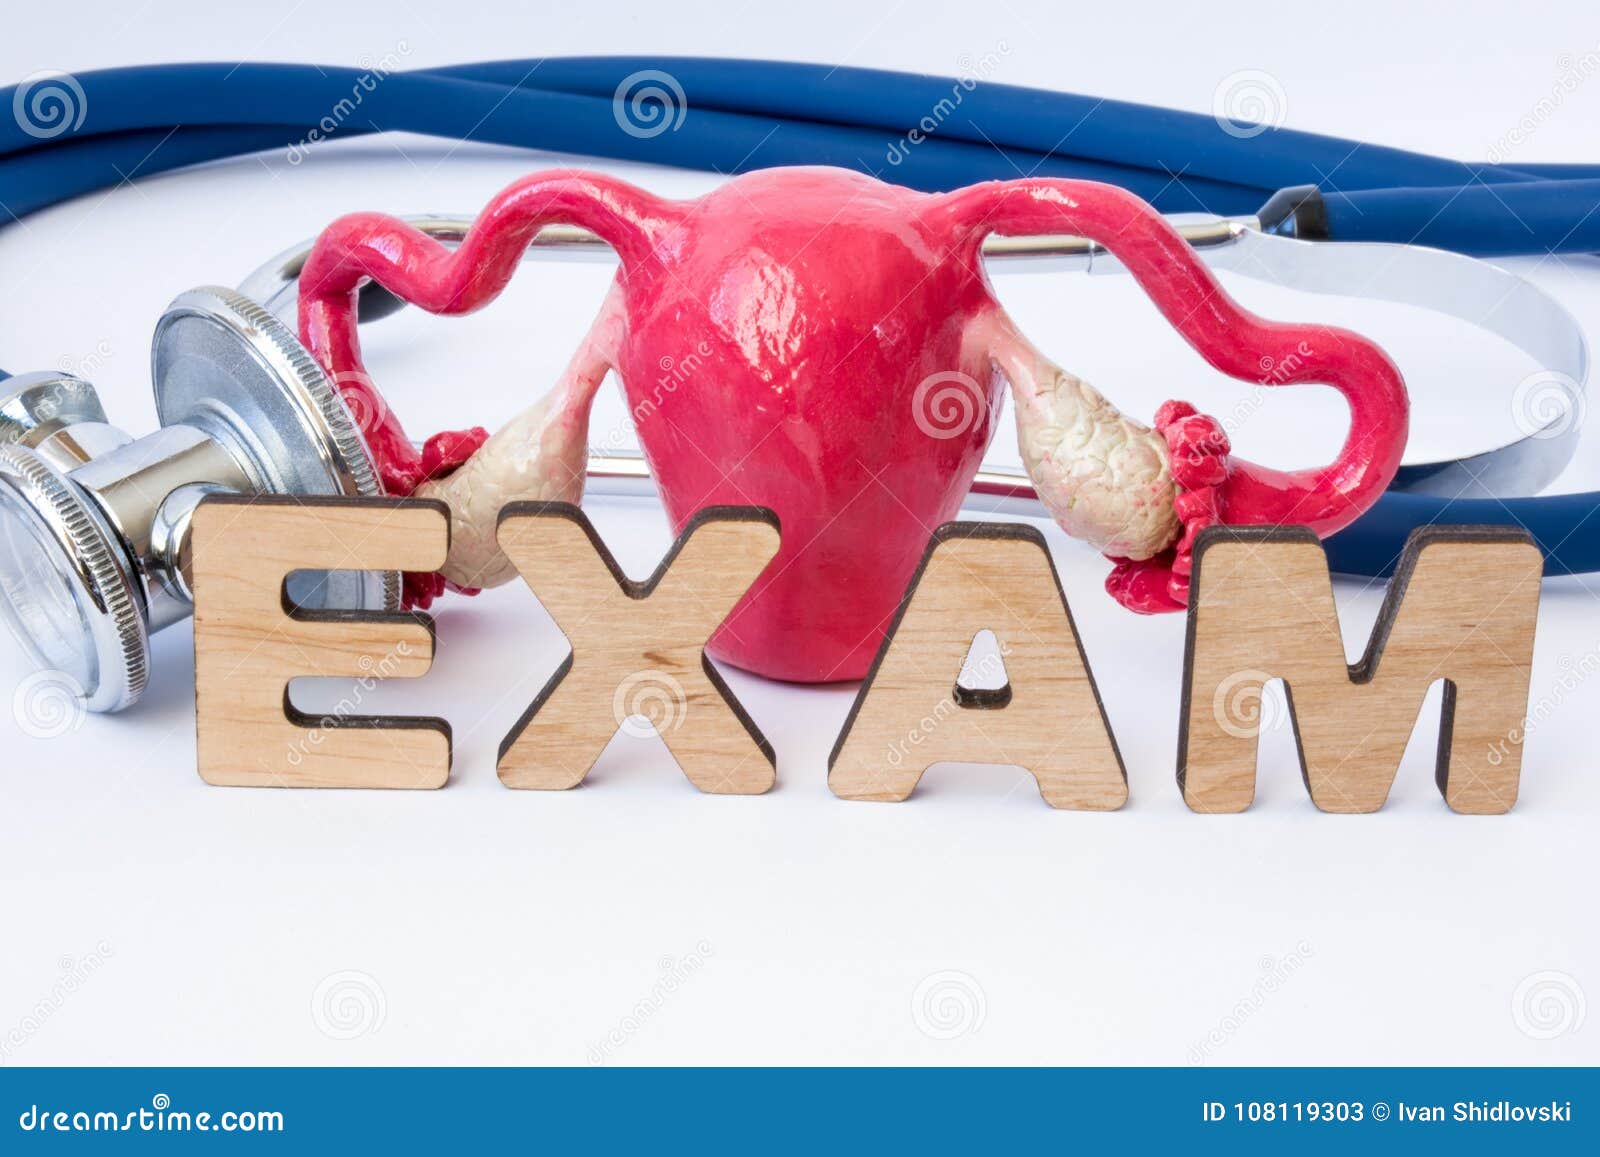 gynecological examination or exam in gynecology concept. model of uterus with ovaries is near stethoscope and word exam composed o